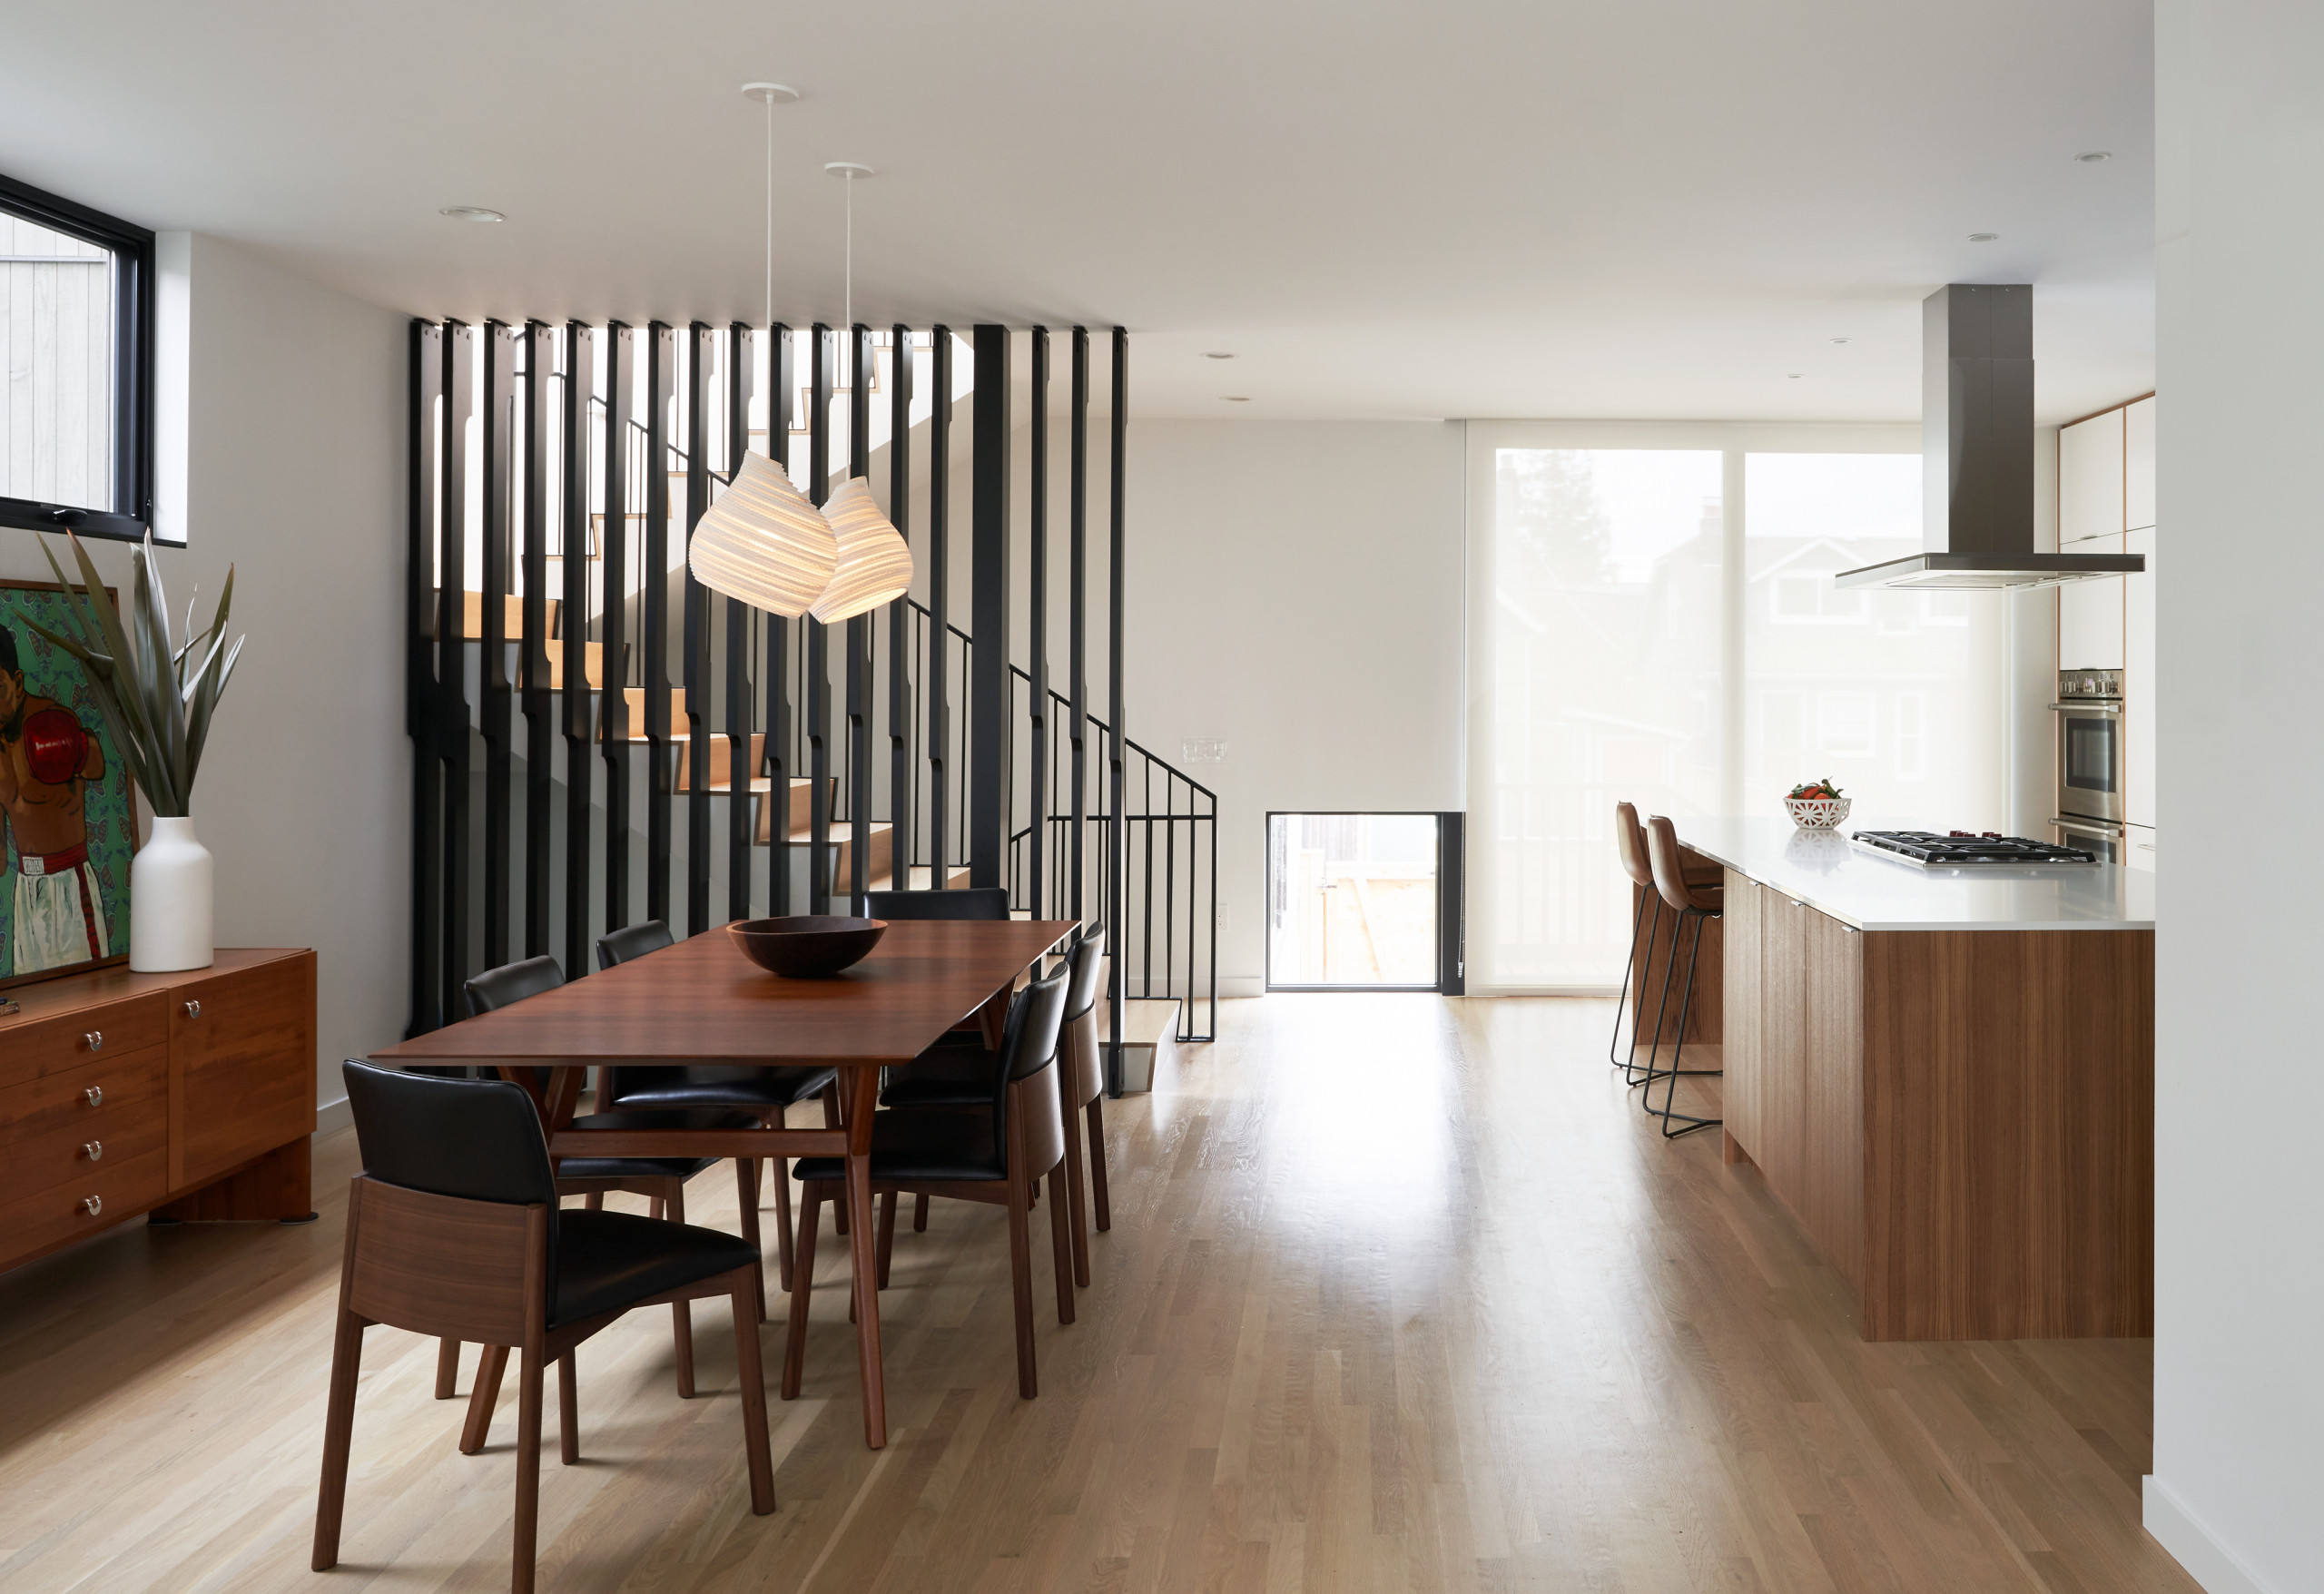 75 Beautiful Scandinavian Dining Room Pictures Ideas February 2021 Houzz